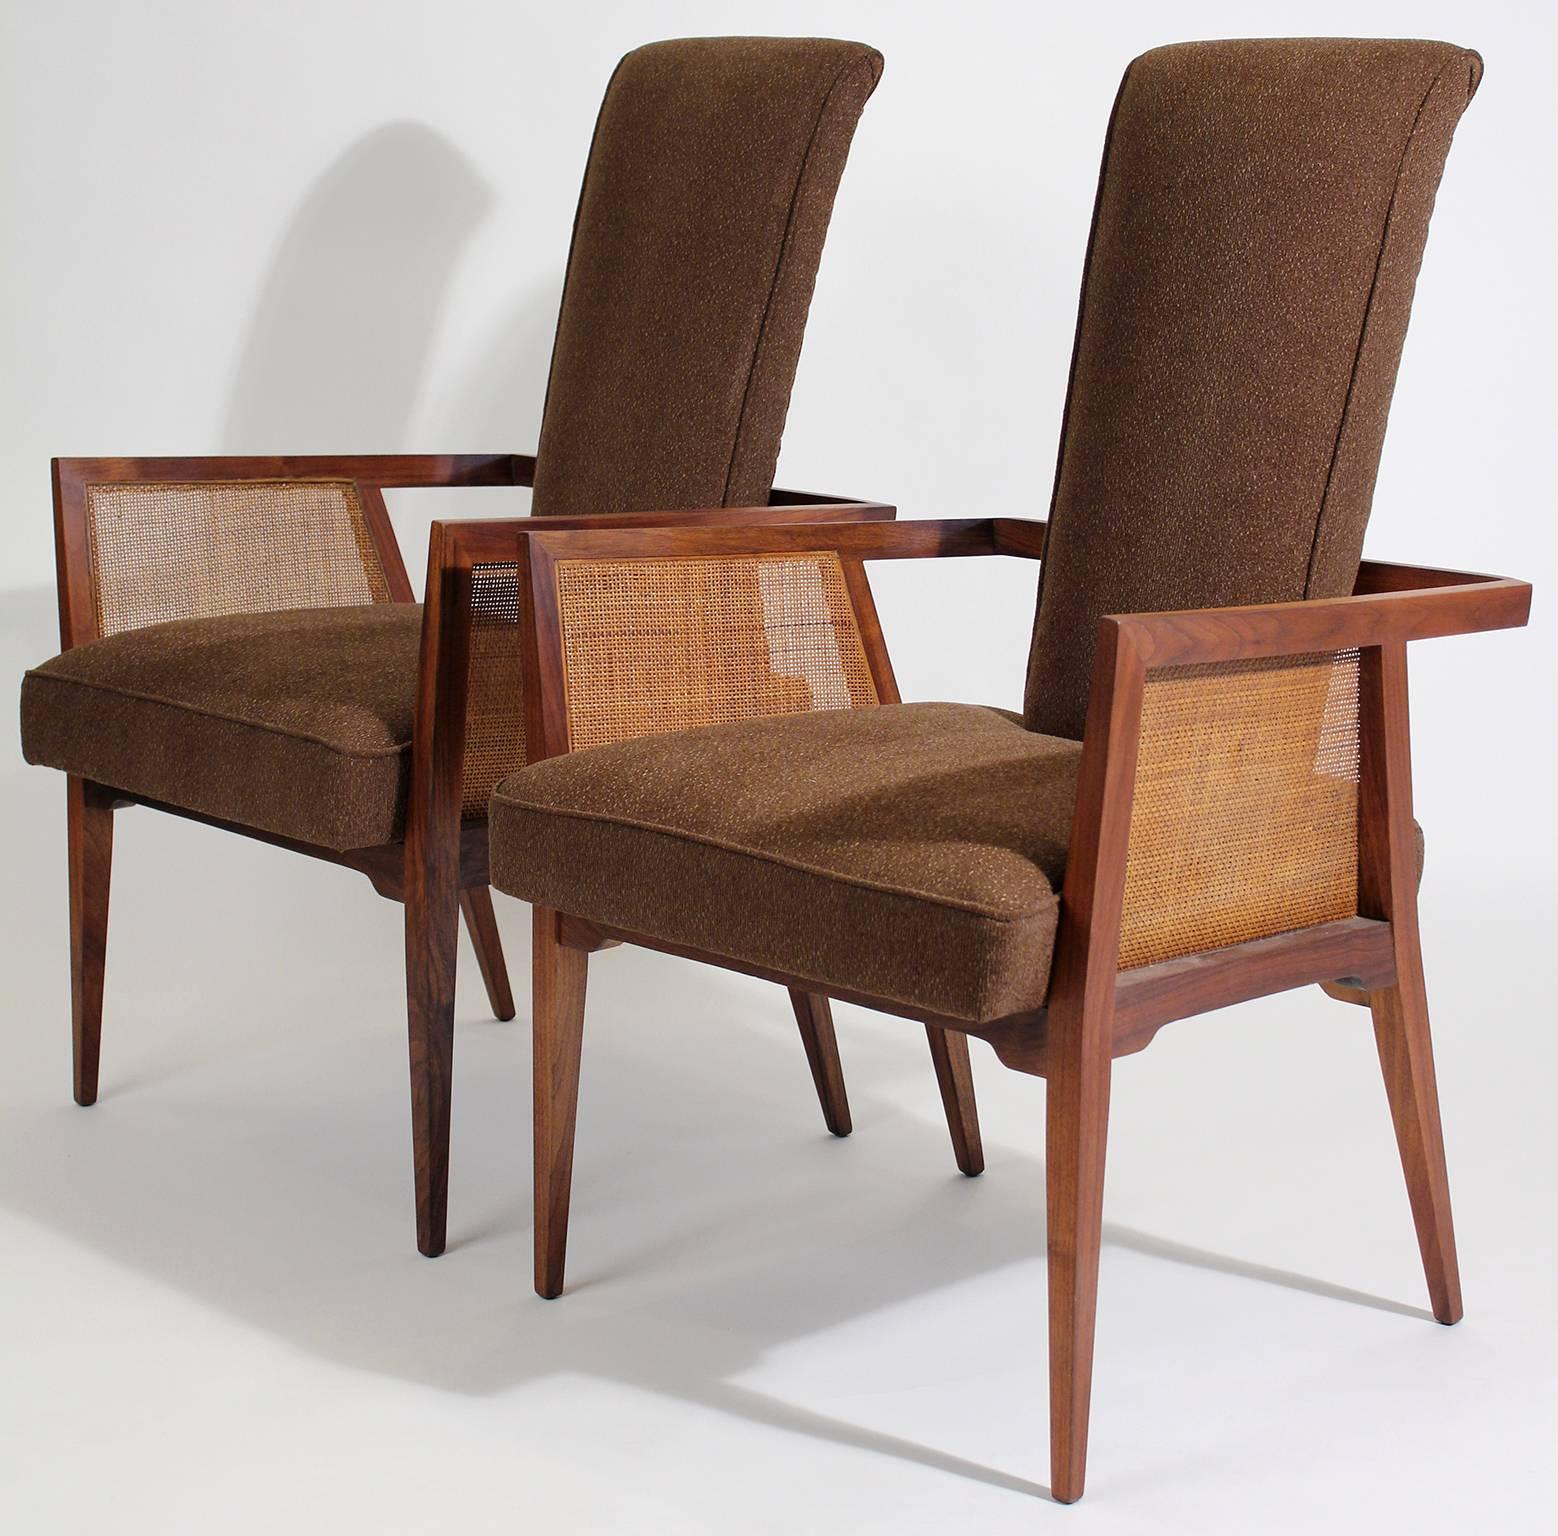 Beautiful set of American modernist walnut and cane tall back sitting or desk accent arm chairs. These would look great as accent to any room or desk. Made of solid American walnut wood with cane sides. The chairs have been re-upholstered and